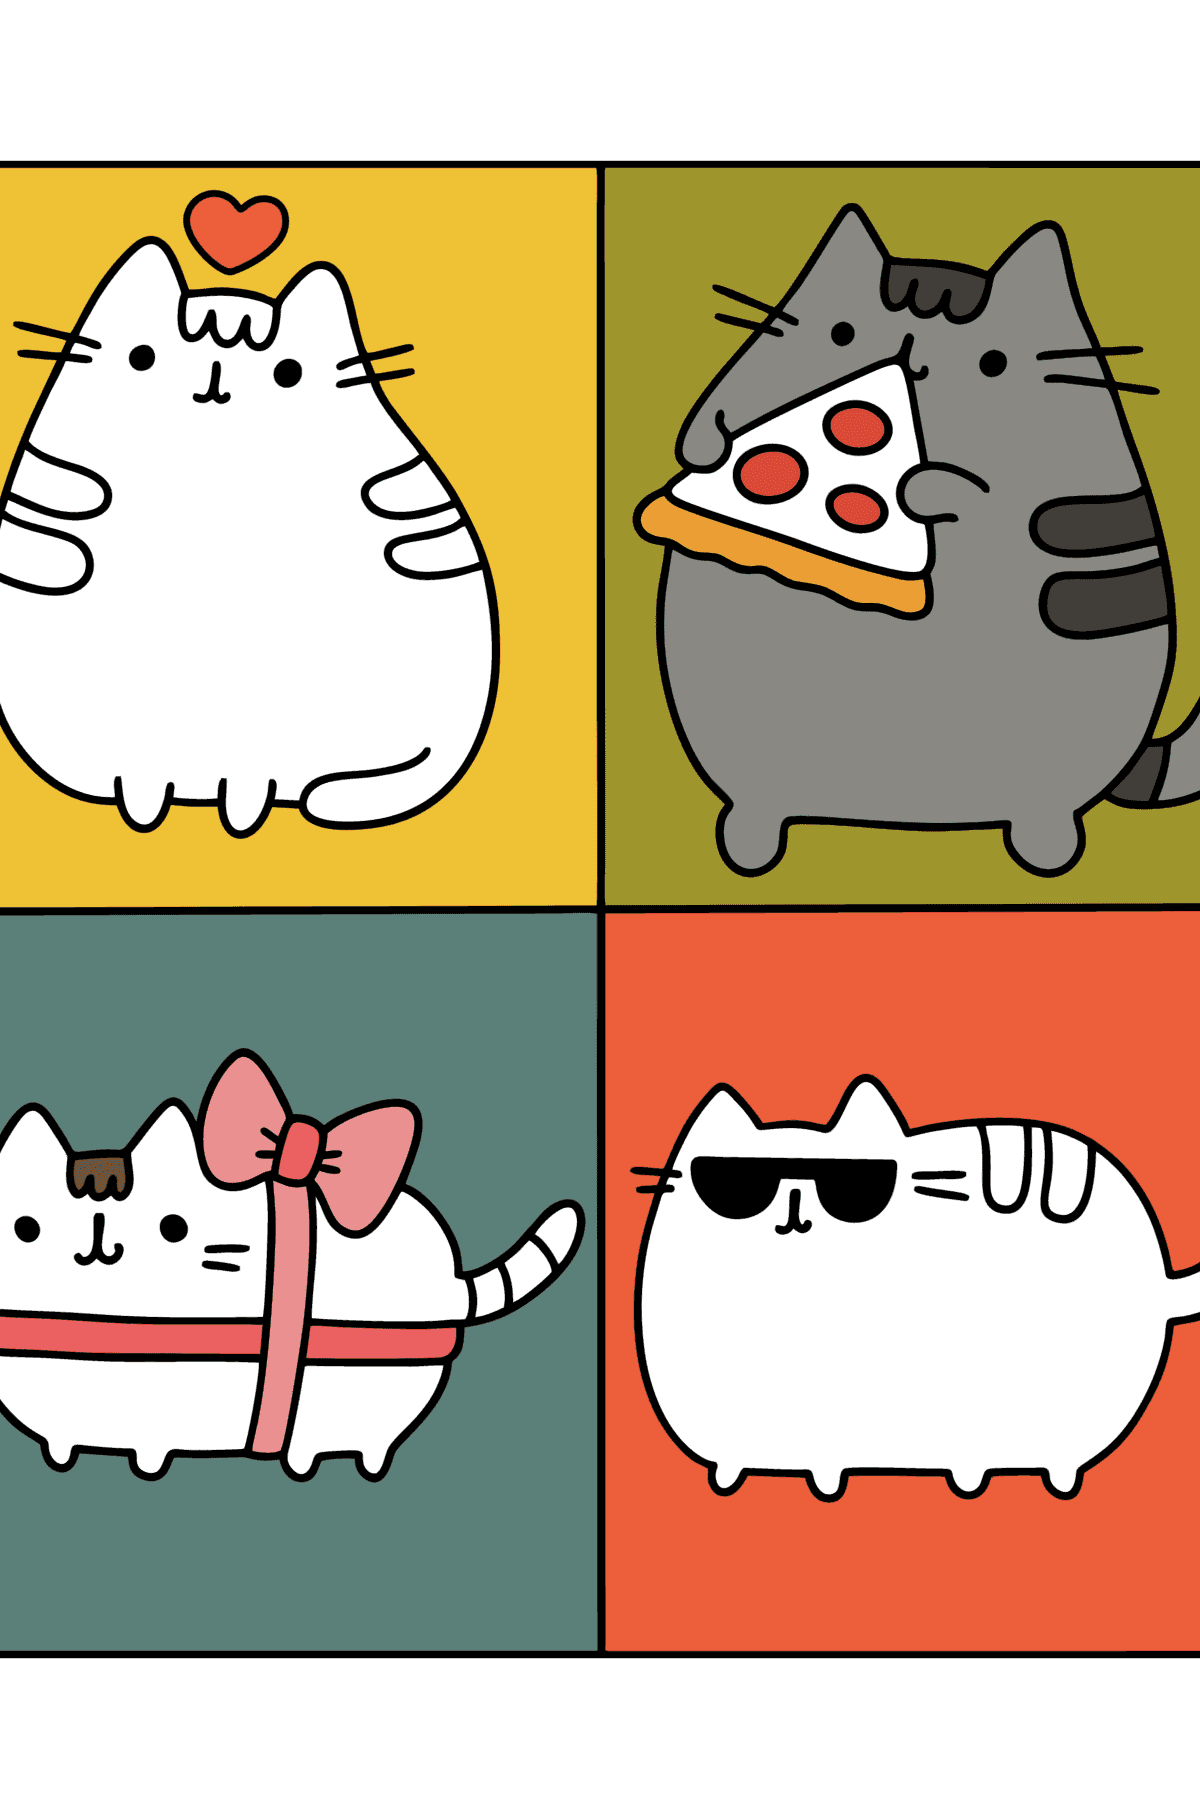 Pusheen mix сoloring page - Coloring Pages for Kids